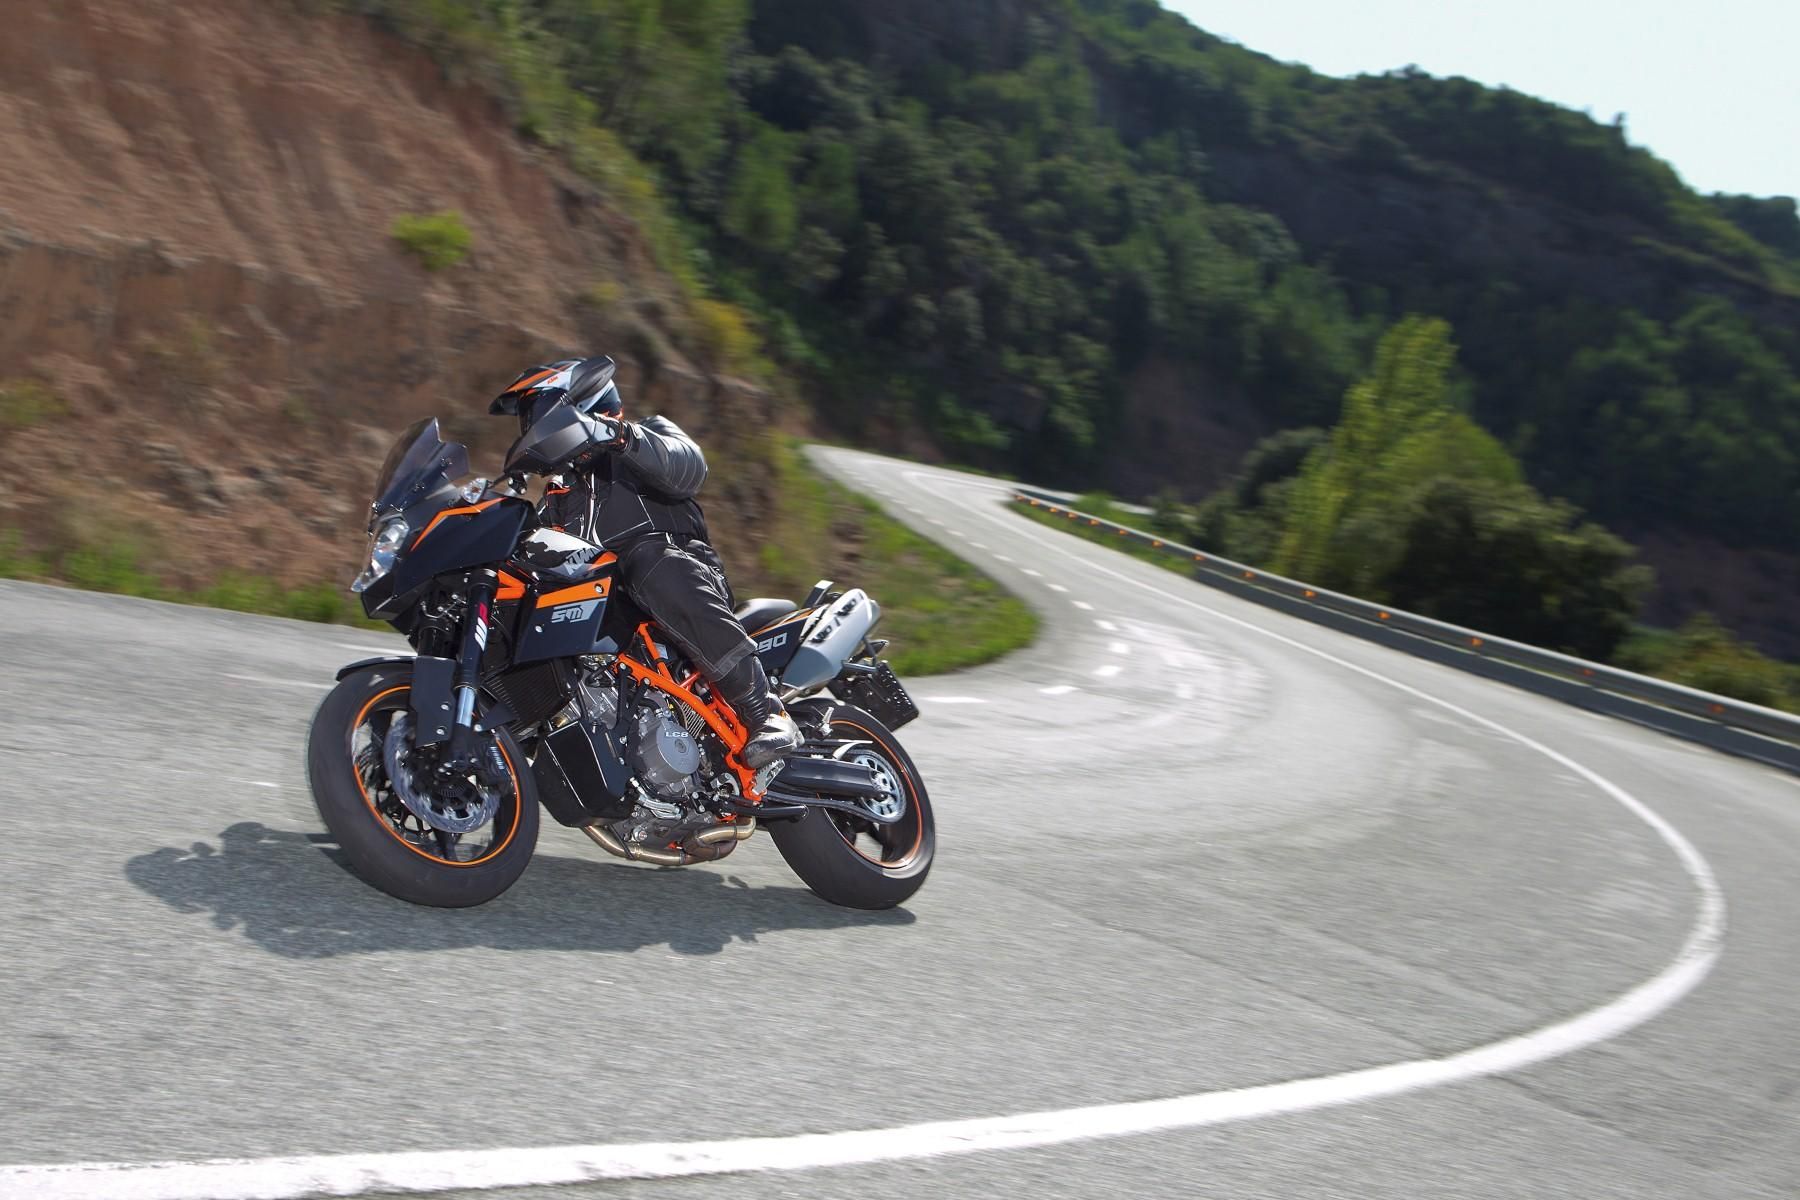 2013 KTM 990 Supermoto T in action 1